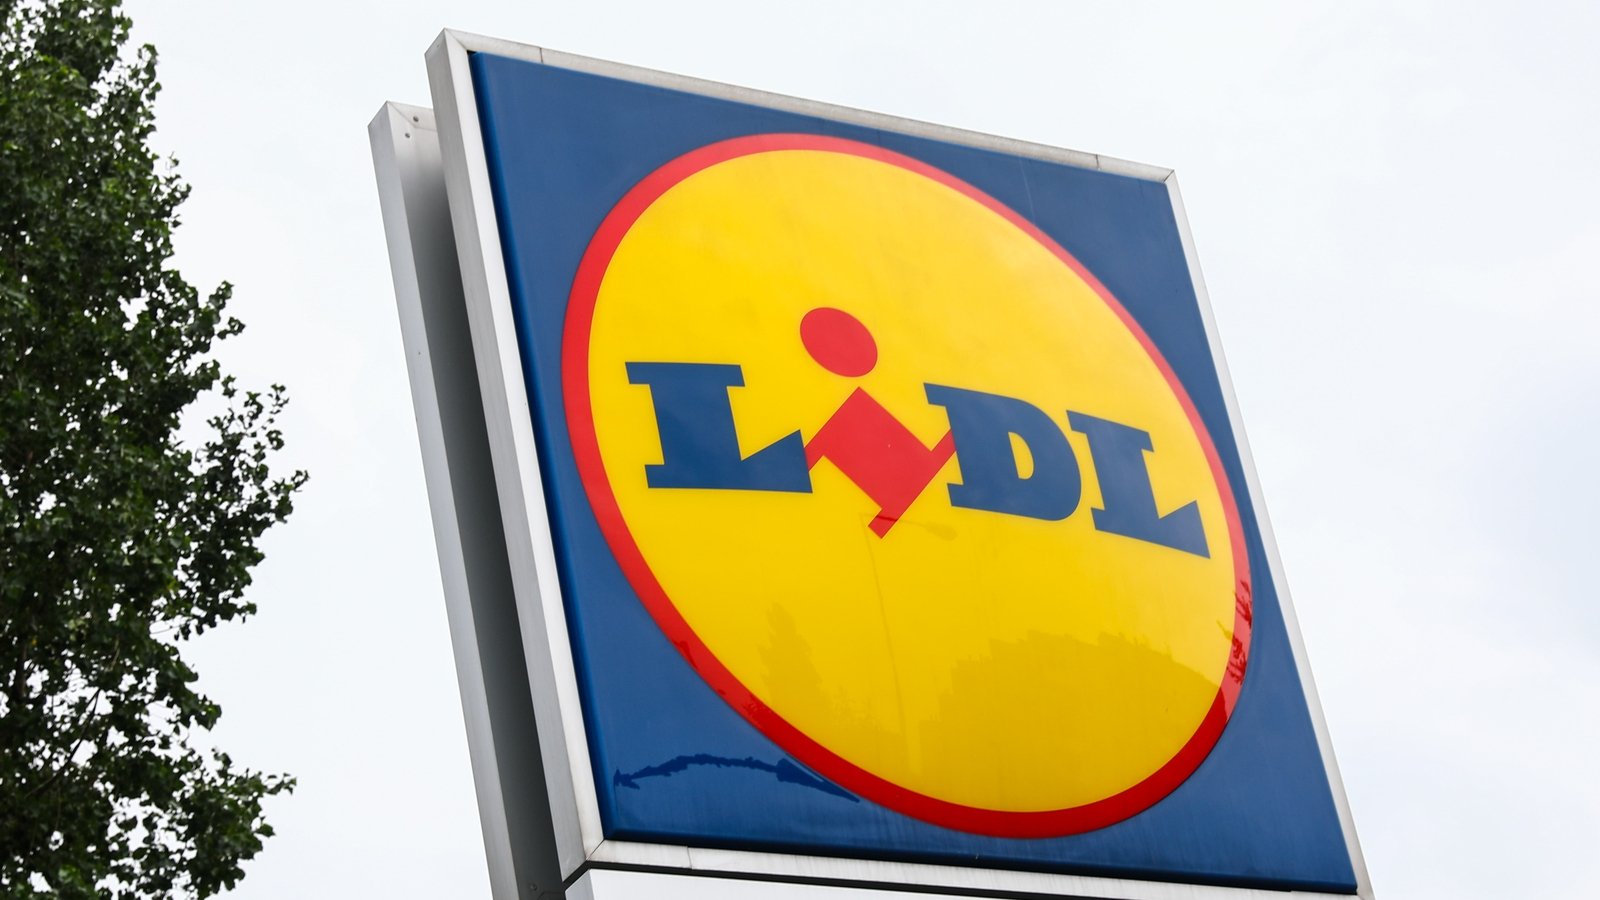 Lidl to increase pay of Irish based employees by 6%